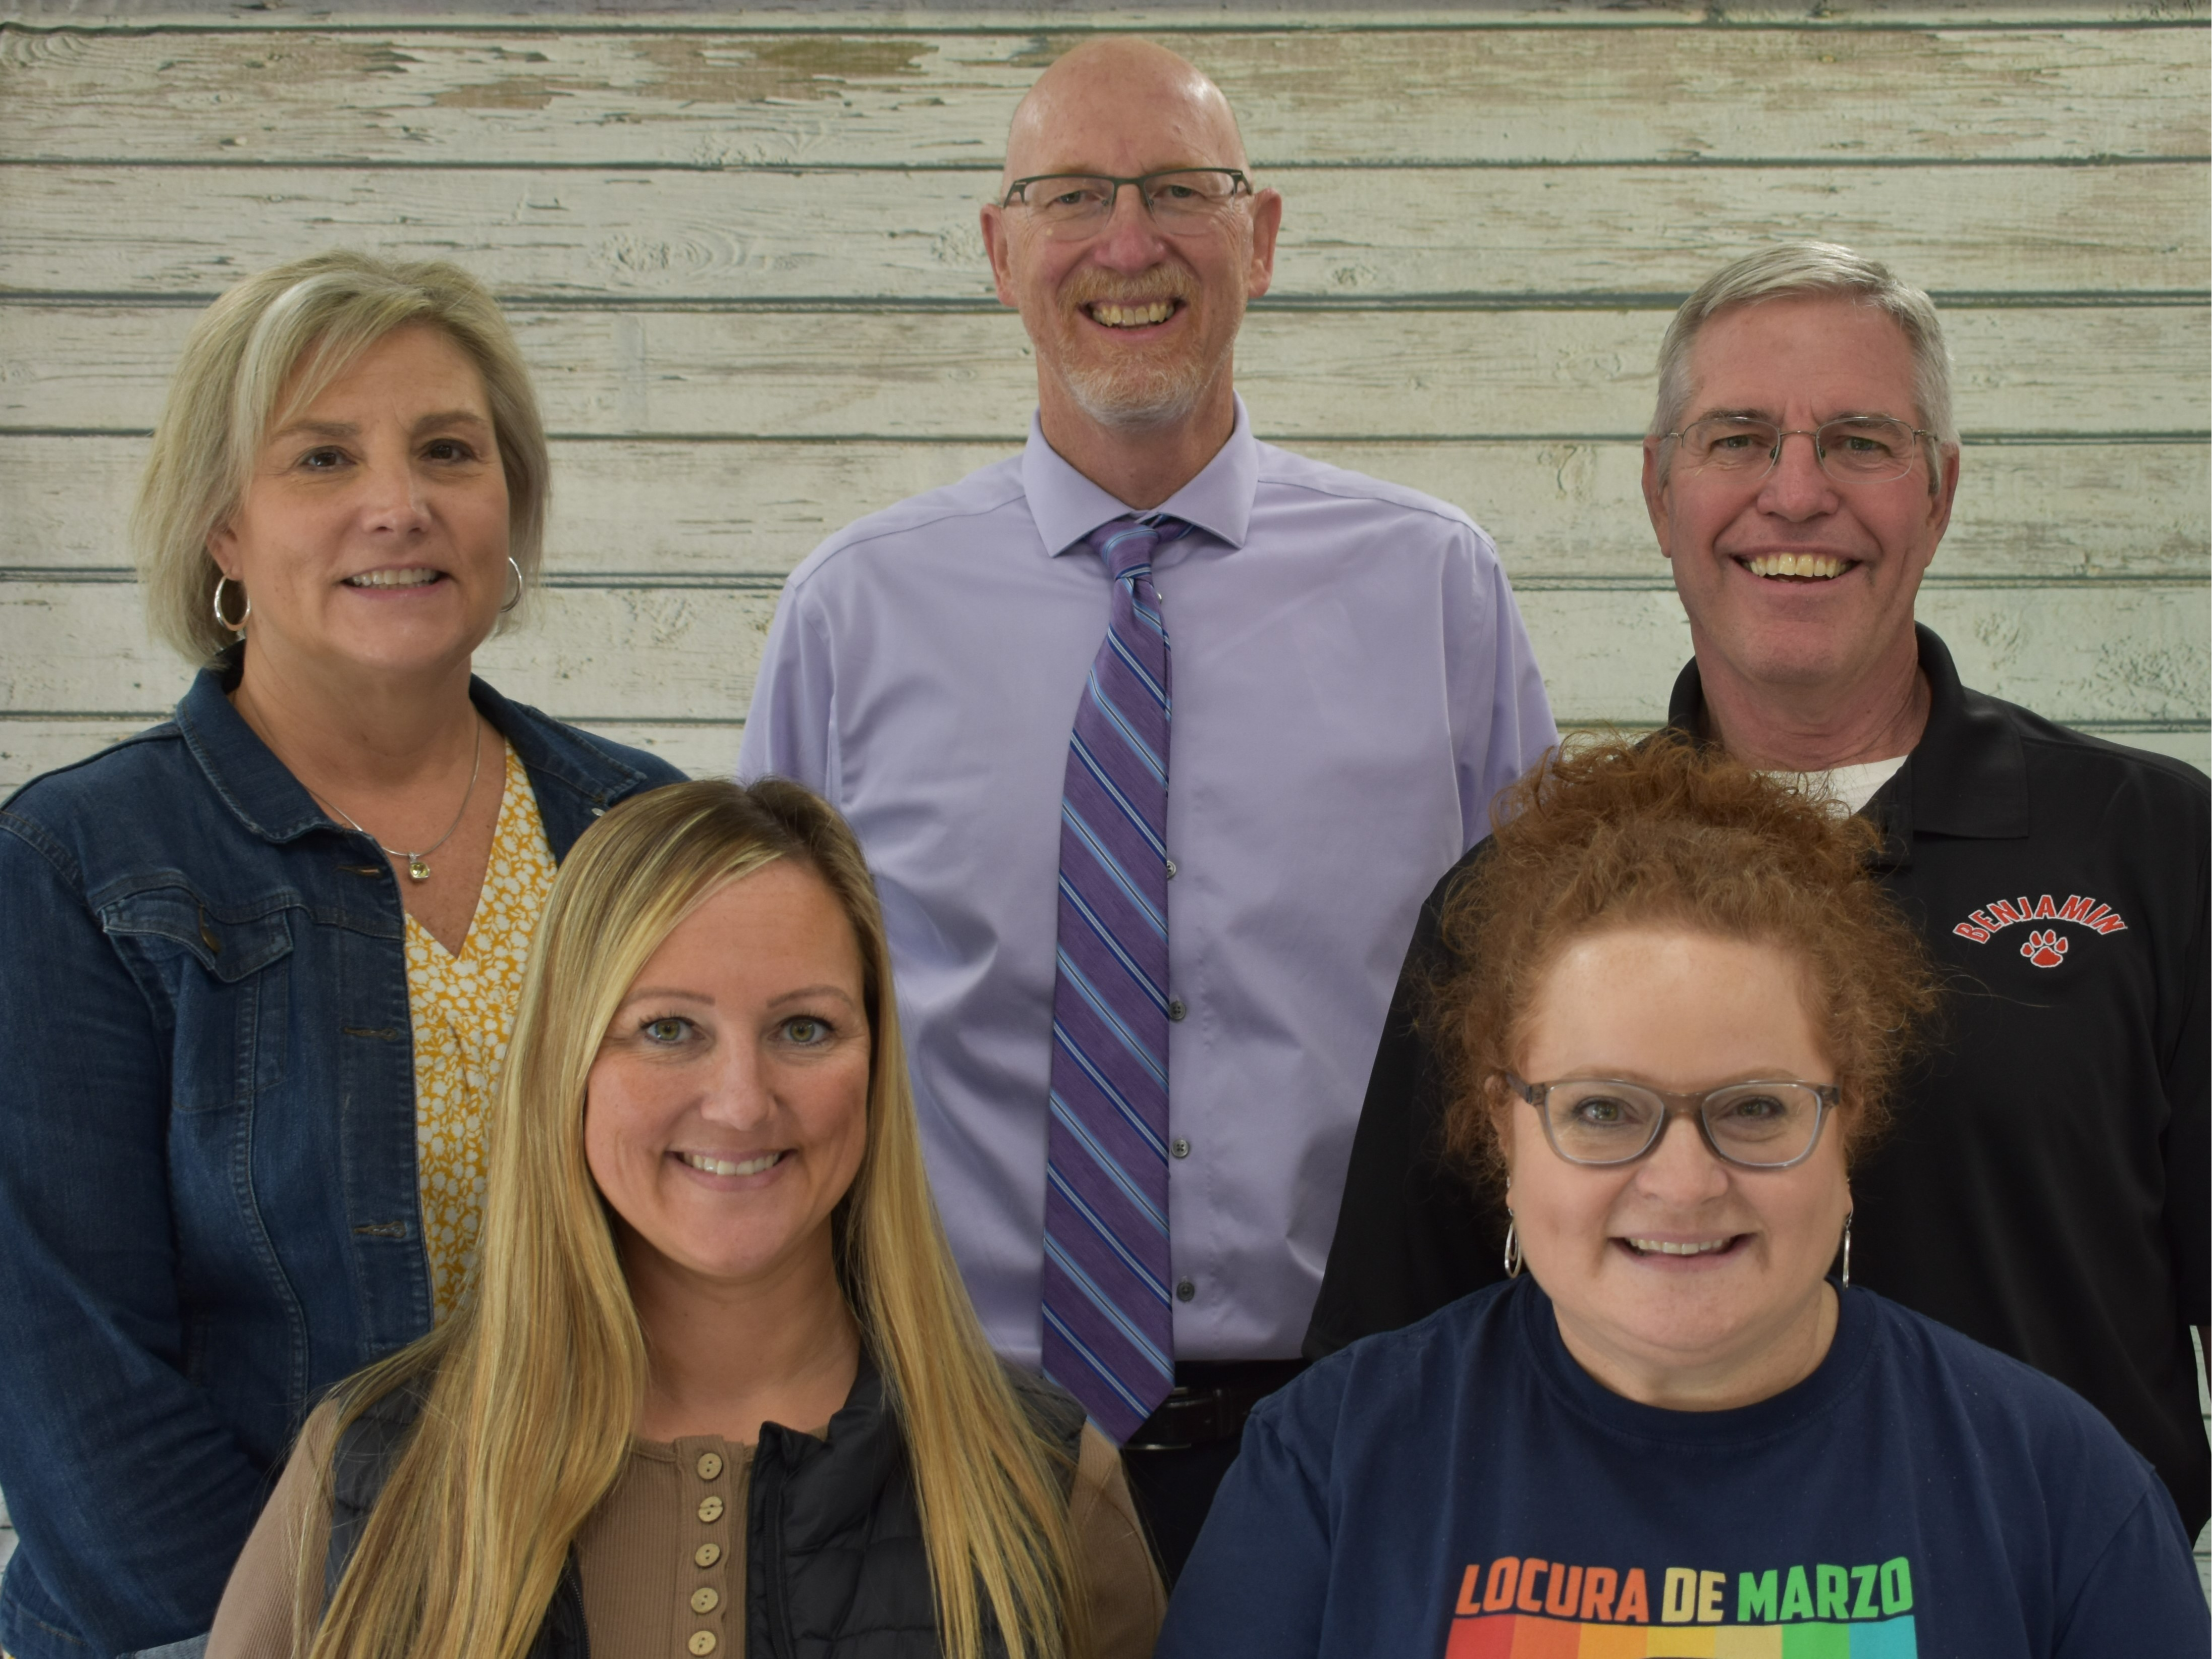 8th grade team picture.  Teachers from left to right are: (back row) Mrs. Davis, Mr. Bradbury, Mr. Wadman, (front row) Mrs. Moore, and Mrs. Anderson